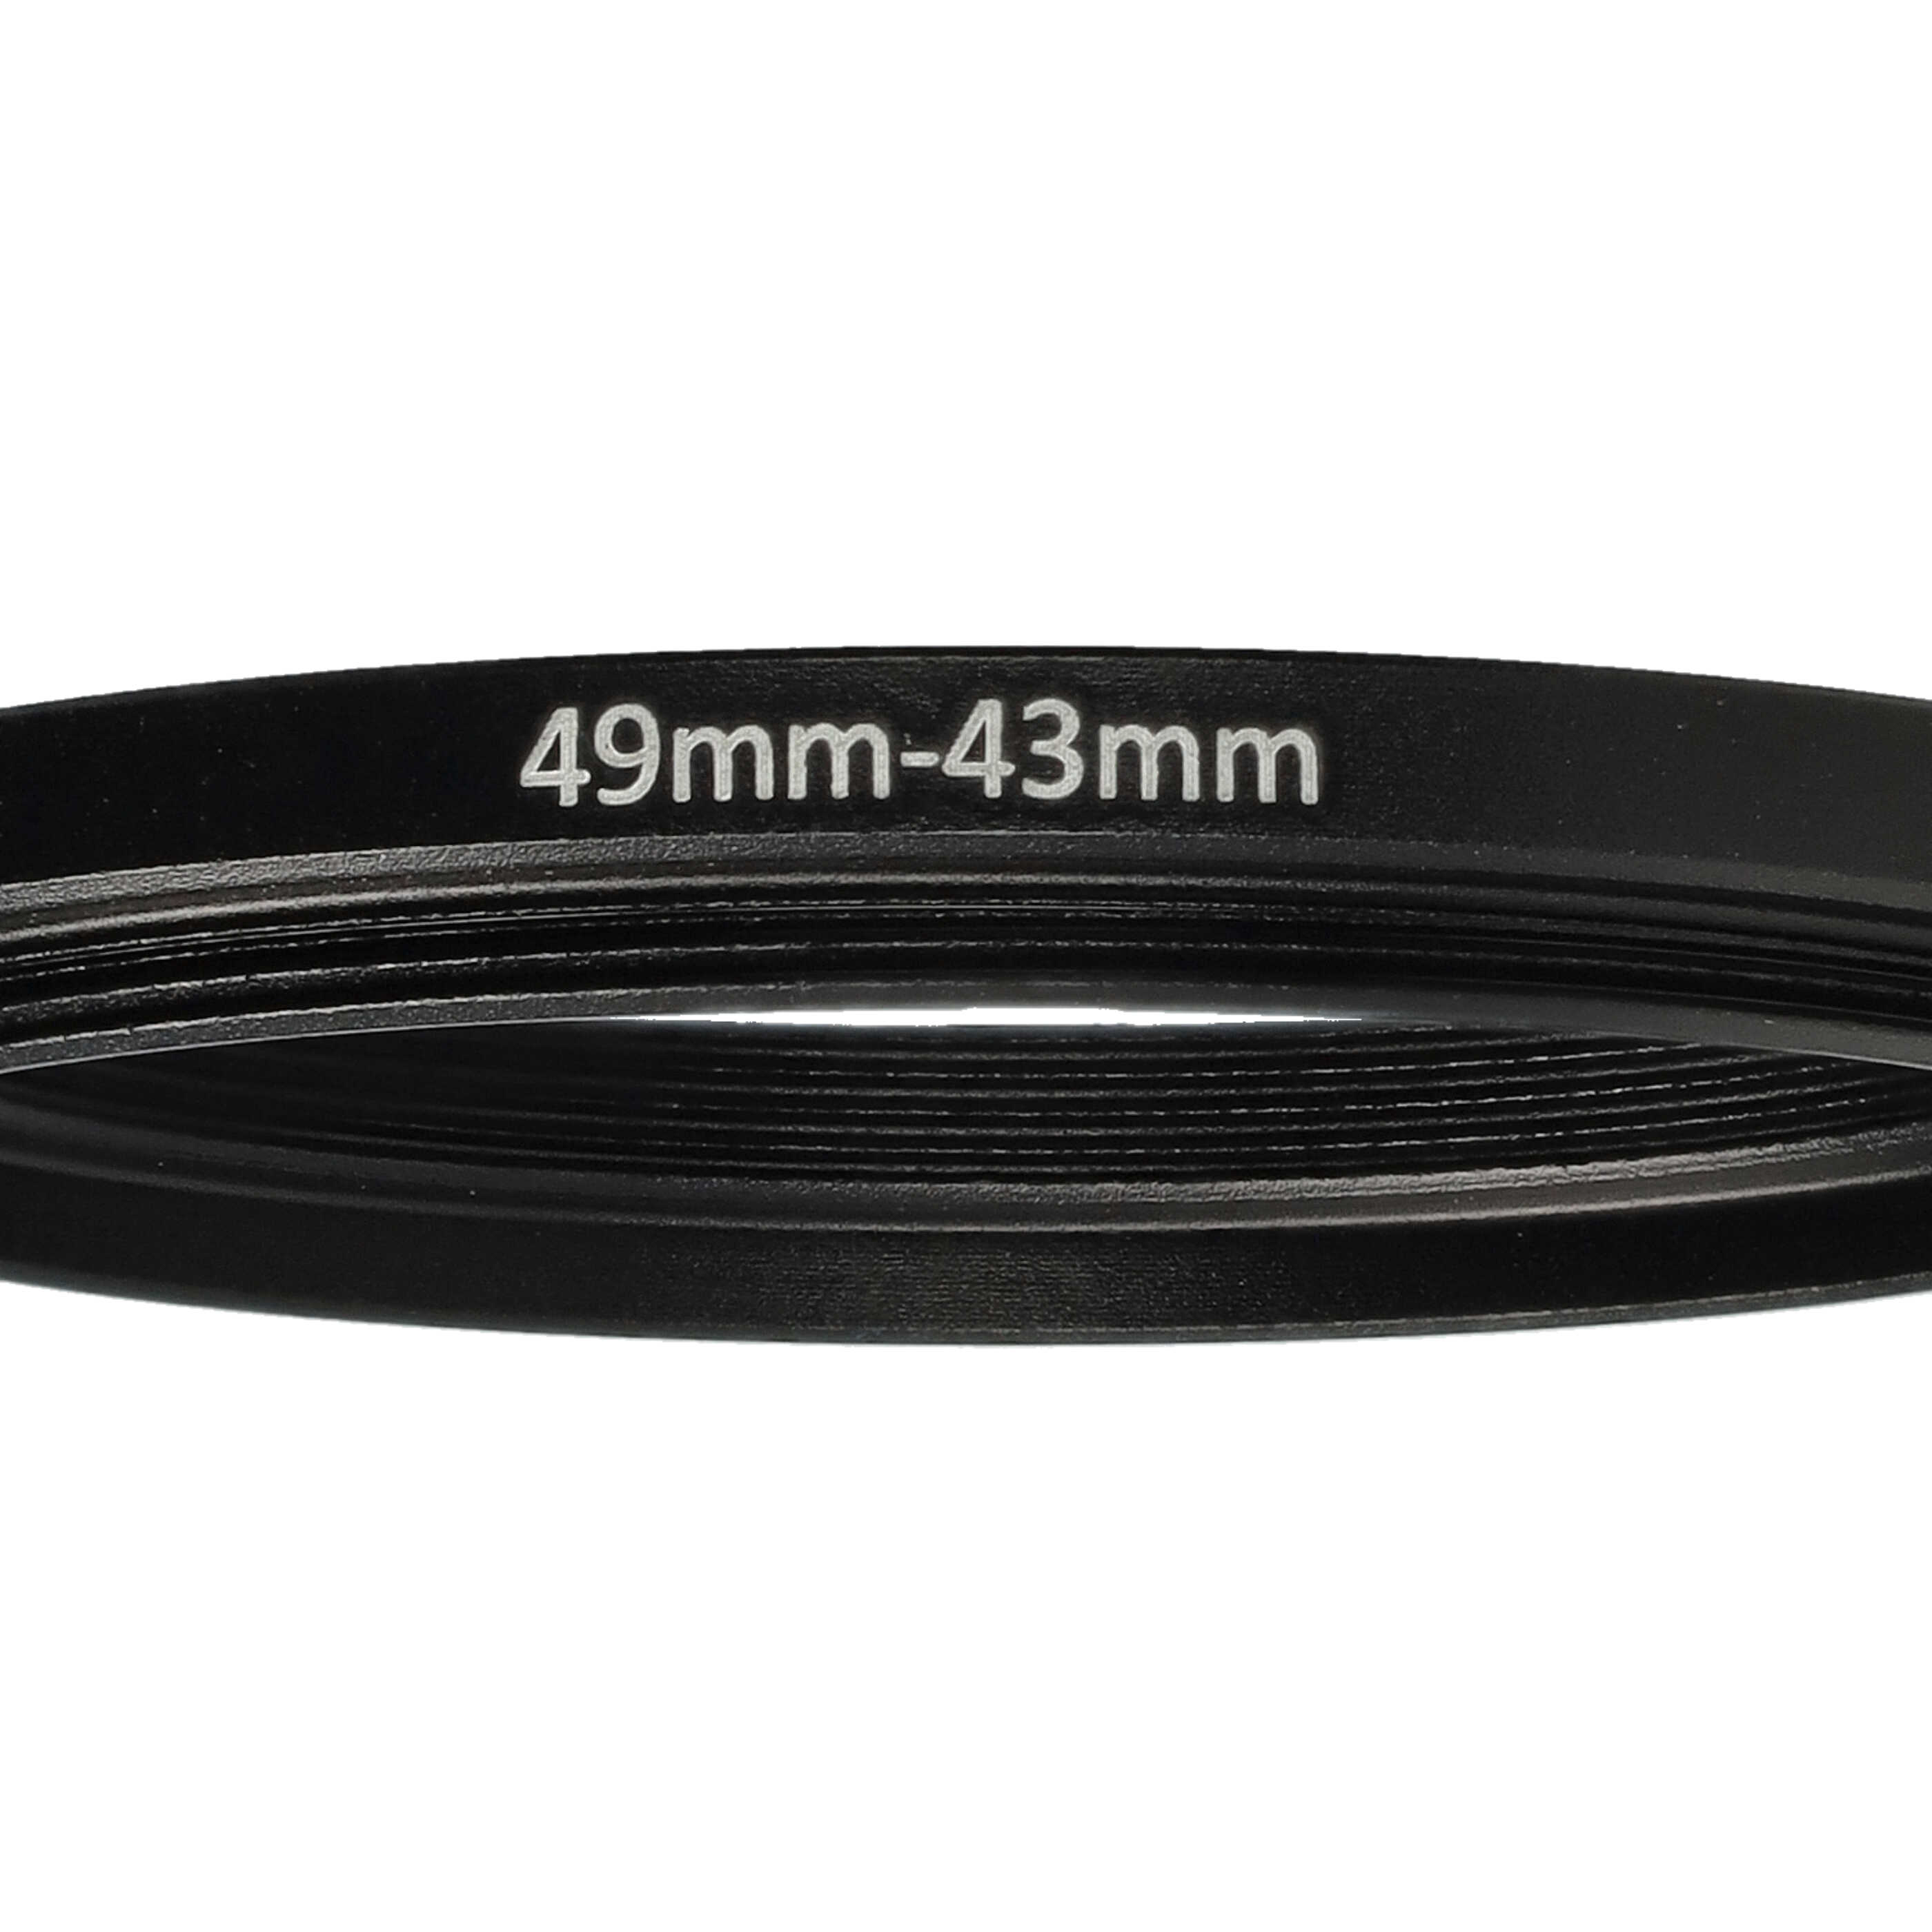 Step-Down Ring Adapter from 49 mm to 43 mm suitable for Camera Lens - Filter Adapter, metal